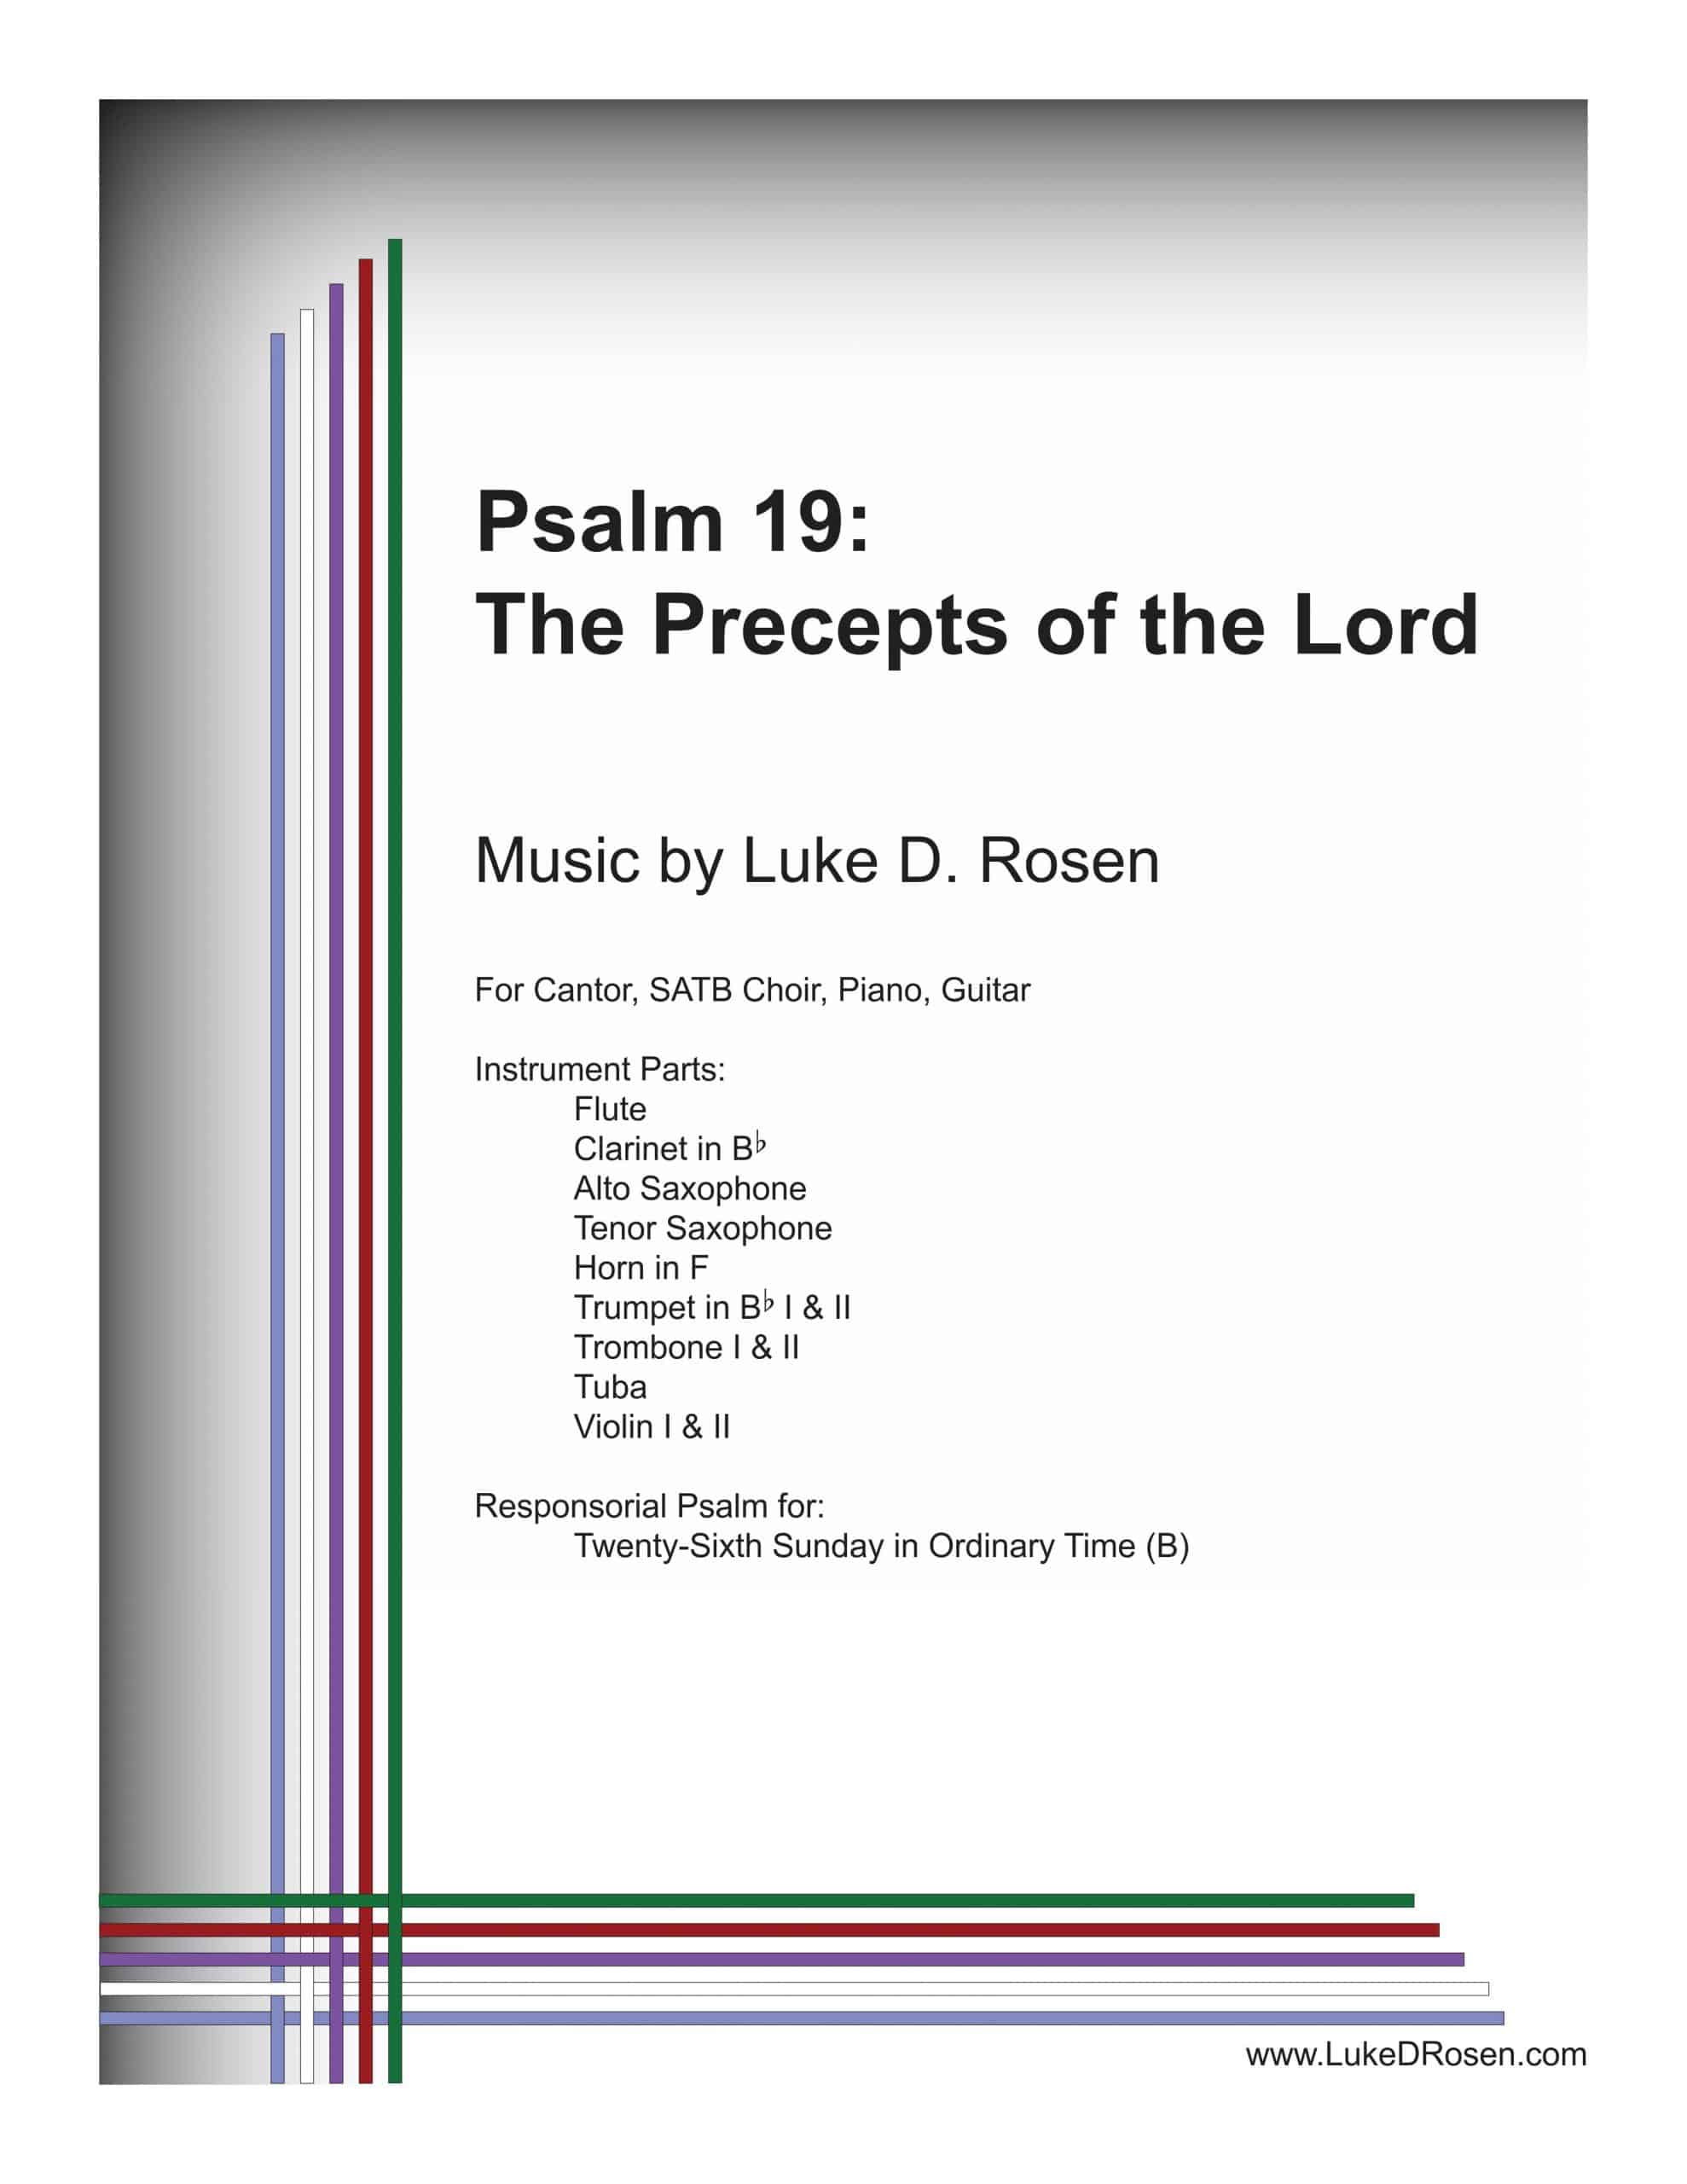 Psalm 19 – The Precepts of the Lord (Rosen)